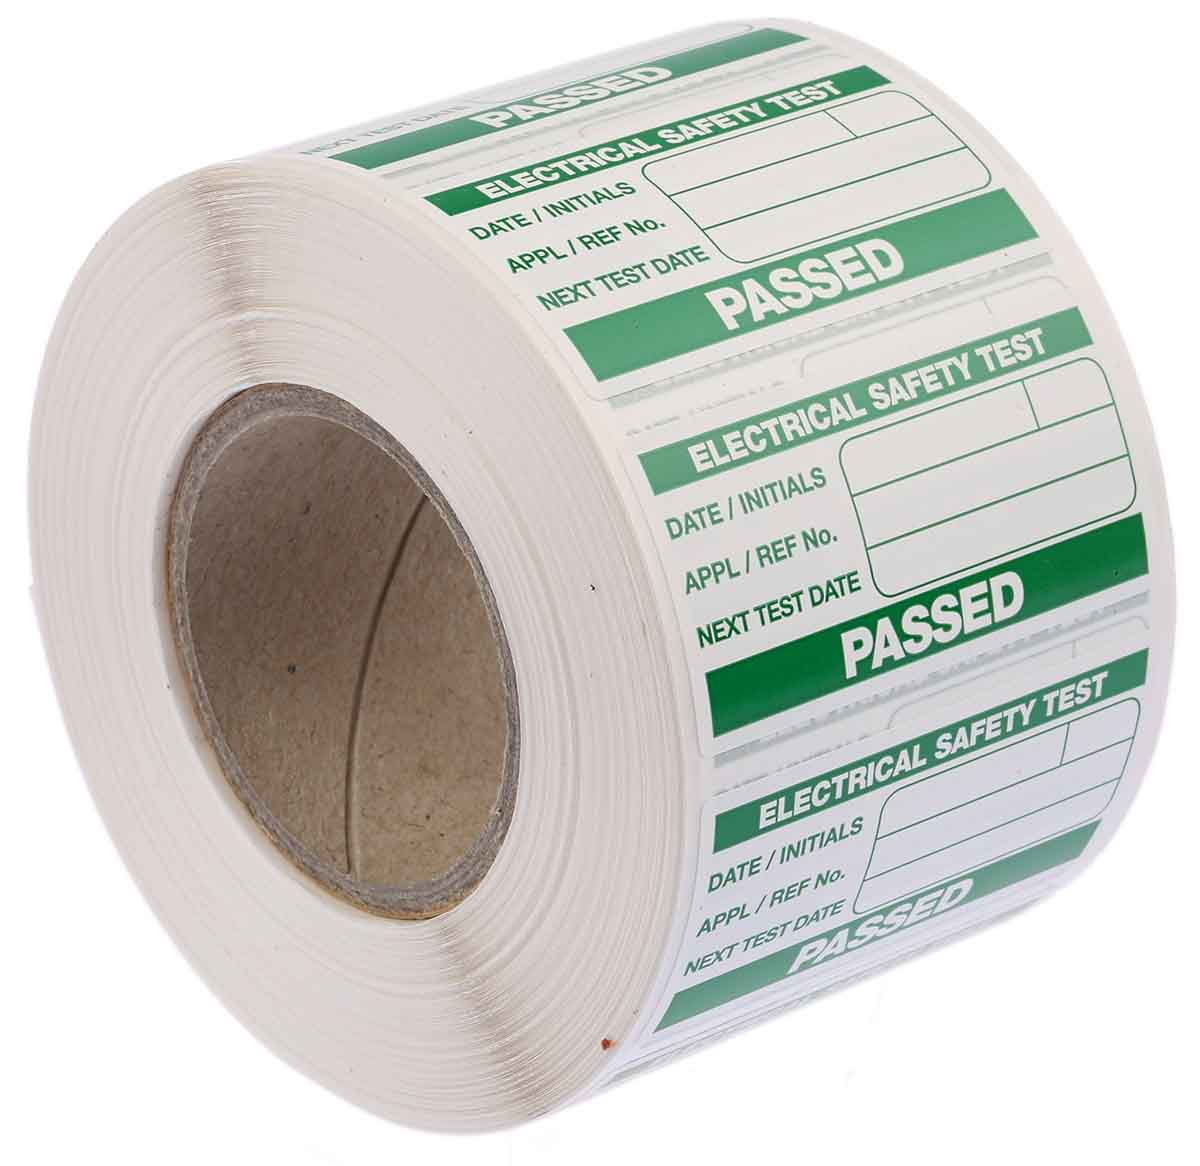 Seaward 91B038 PAT Testing Label, For Use With Portable Appliance Testers